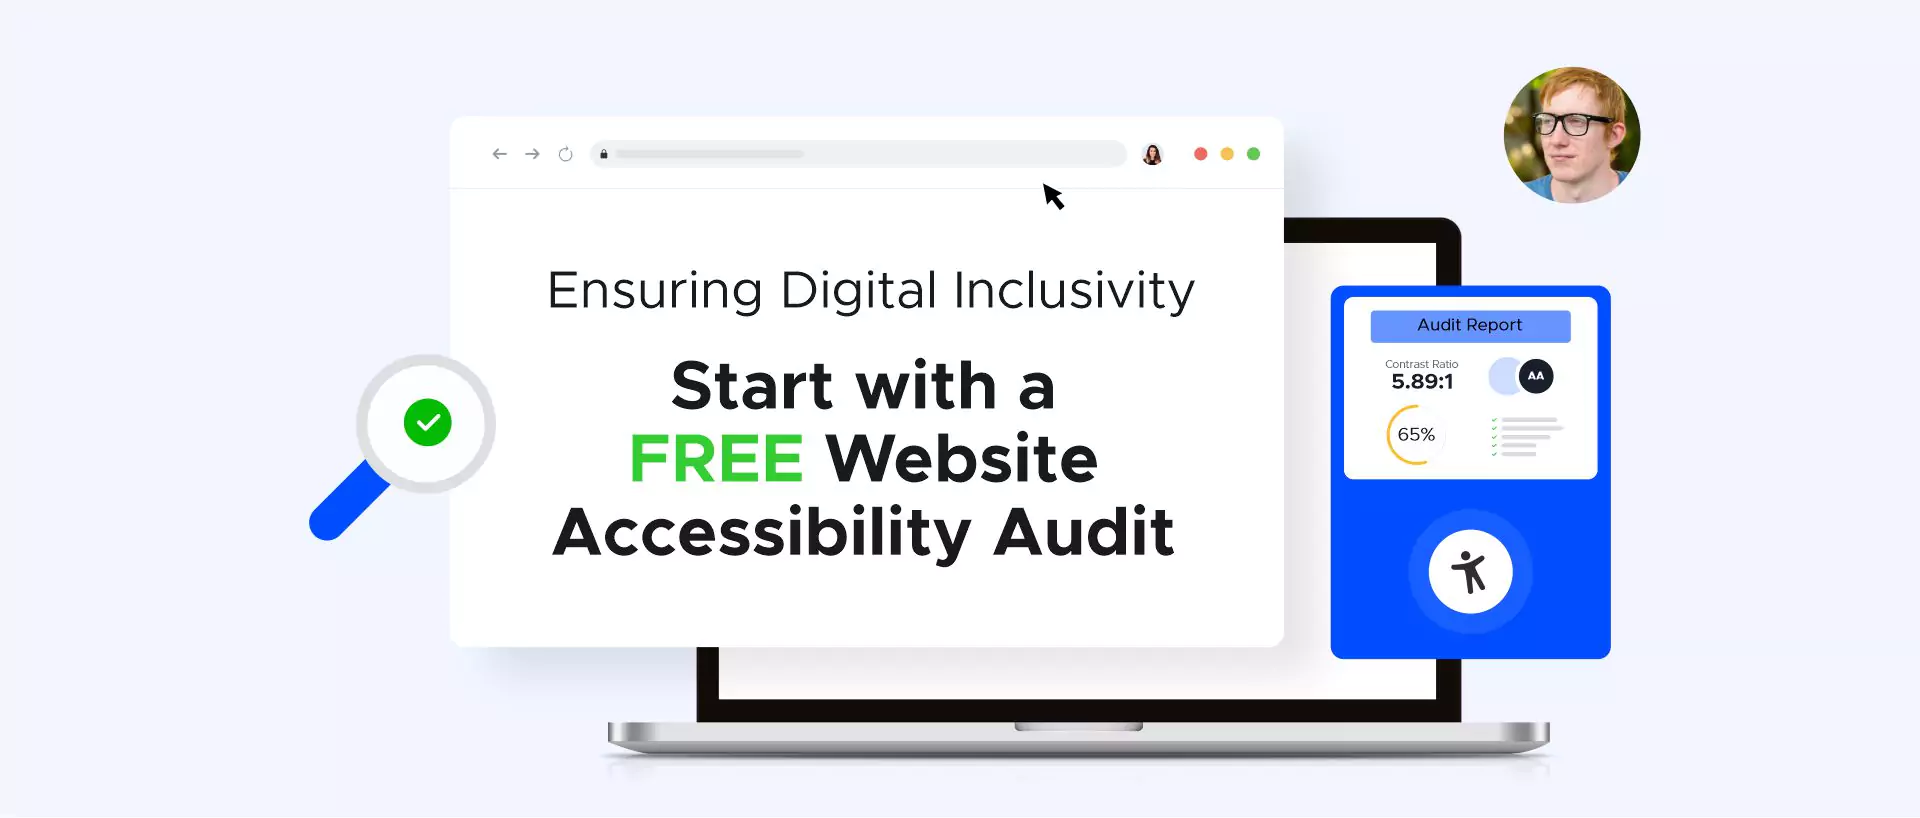 Ensuring Digital Inclusivity: Start with a FREE Website Accessibility Audit